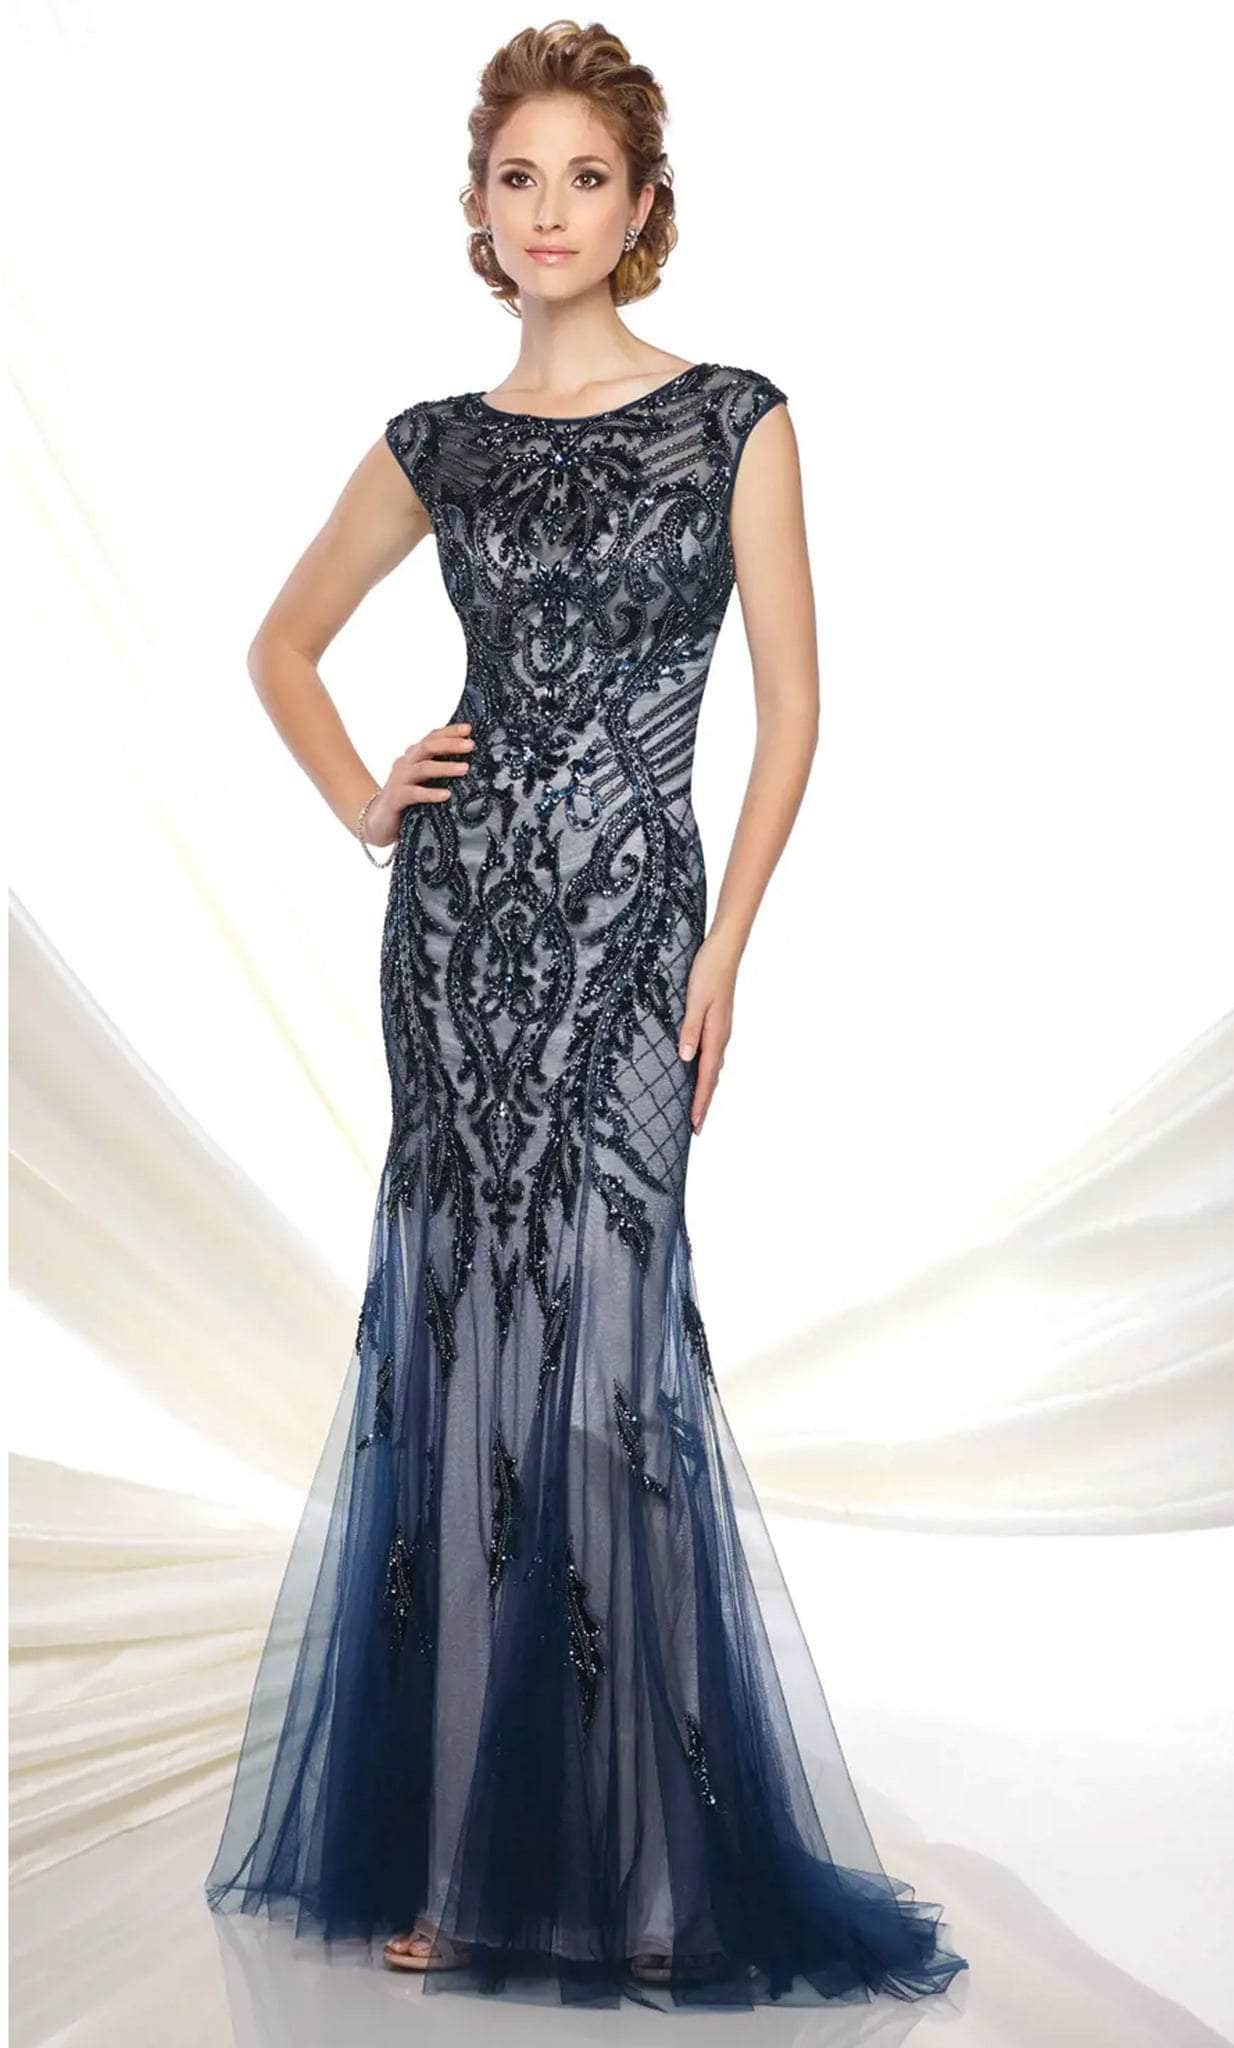 Image of Ivonne D 116D31W - Embellished Sleeveless Mother of the Bride Dress